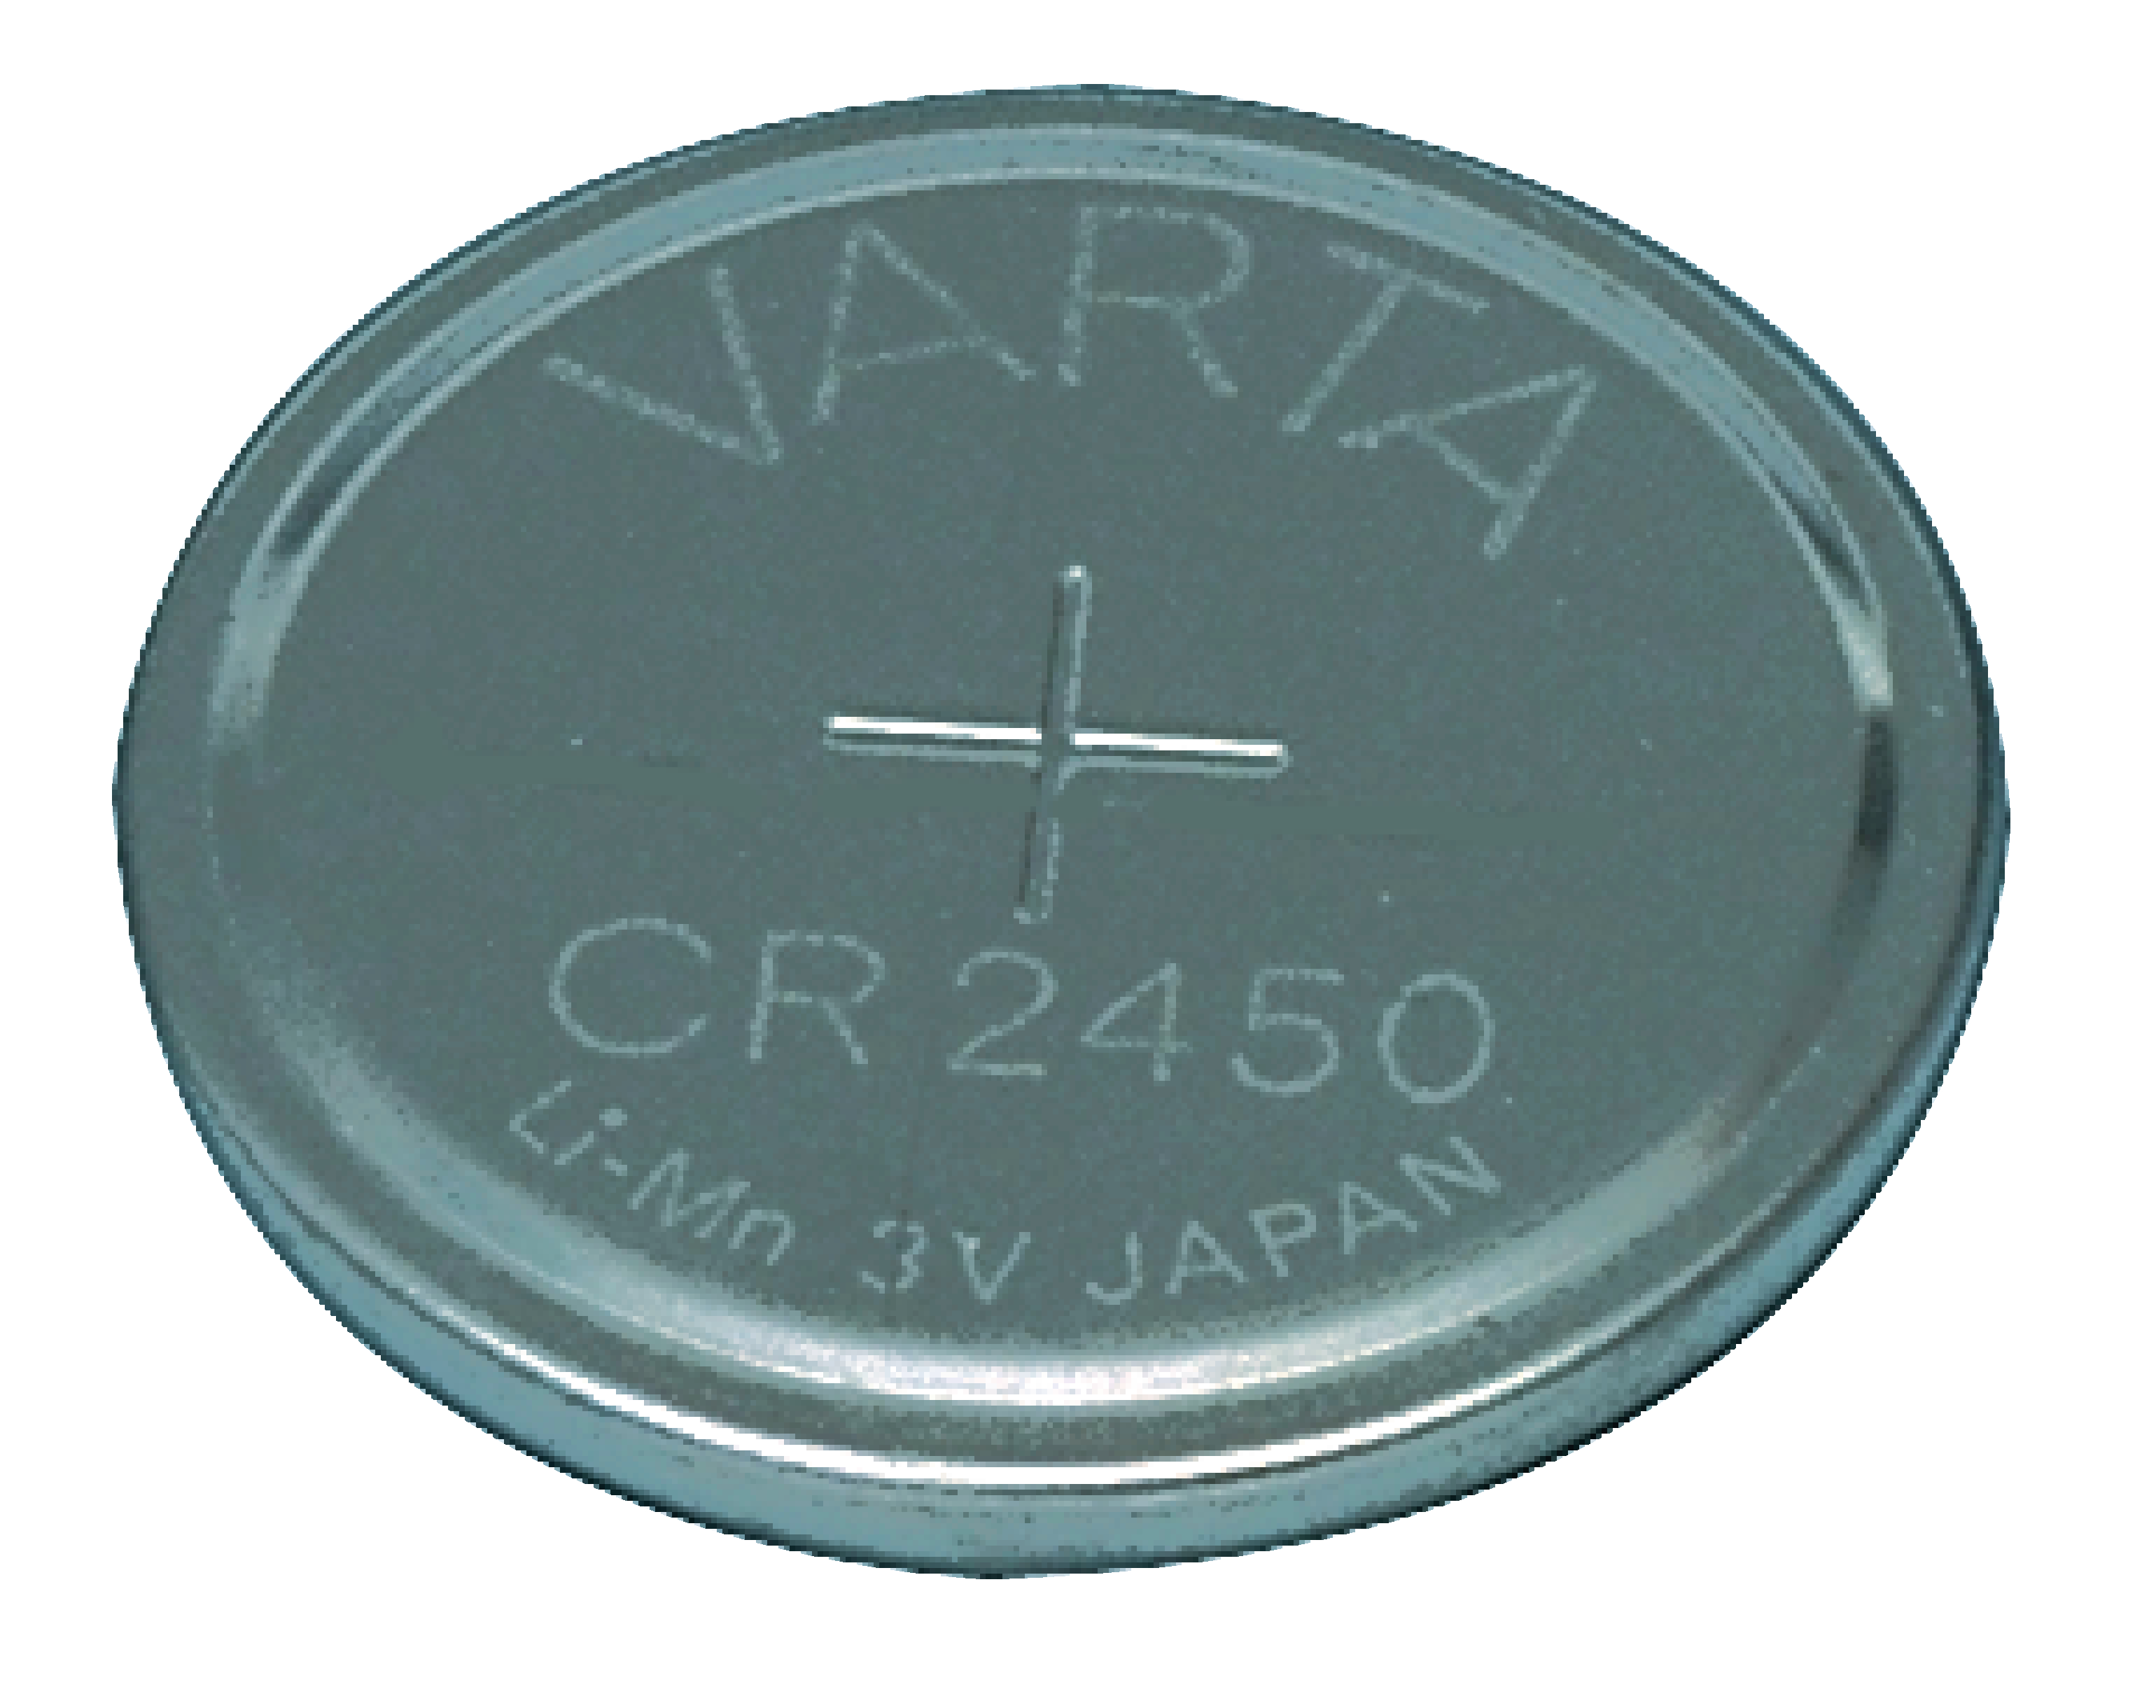 Lithium Button Cell Battery CR2450, 3 V DC, 570 mAh